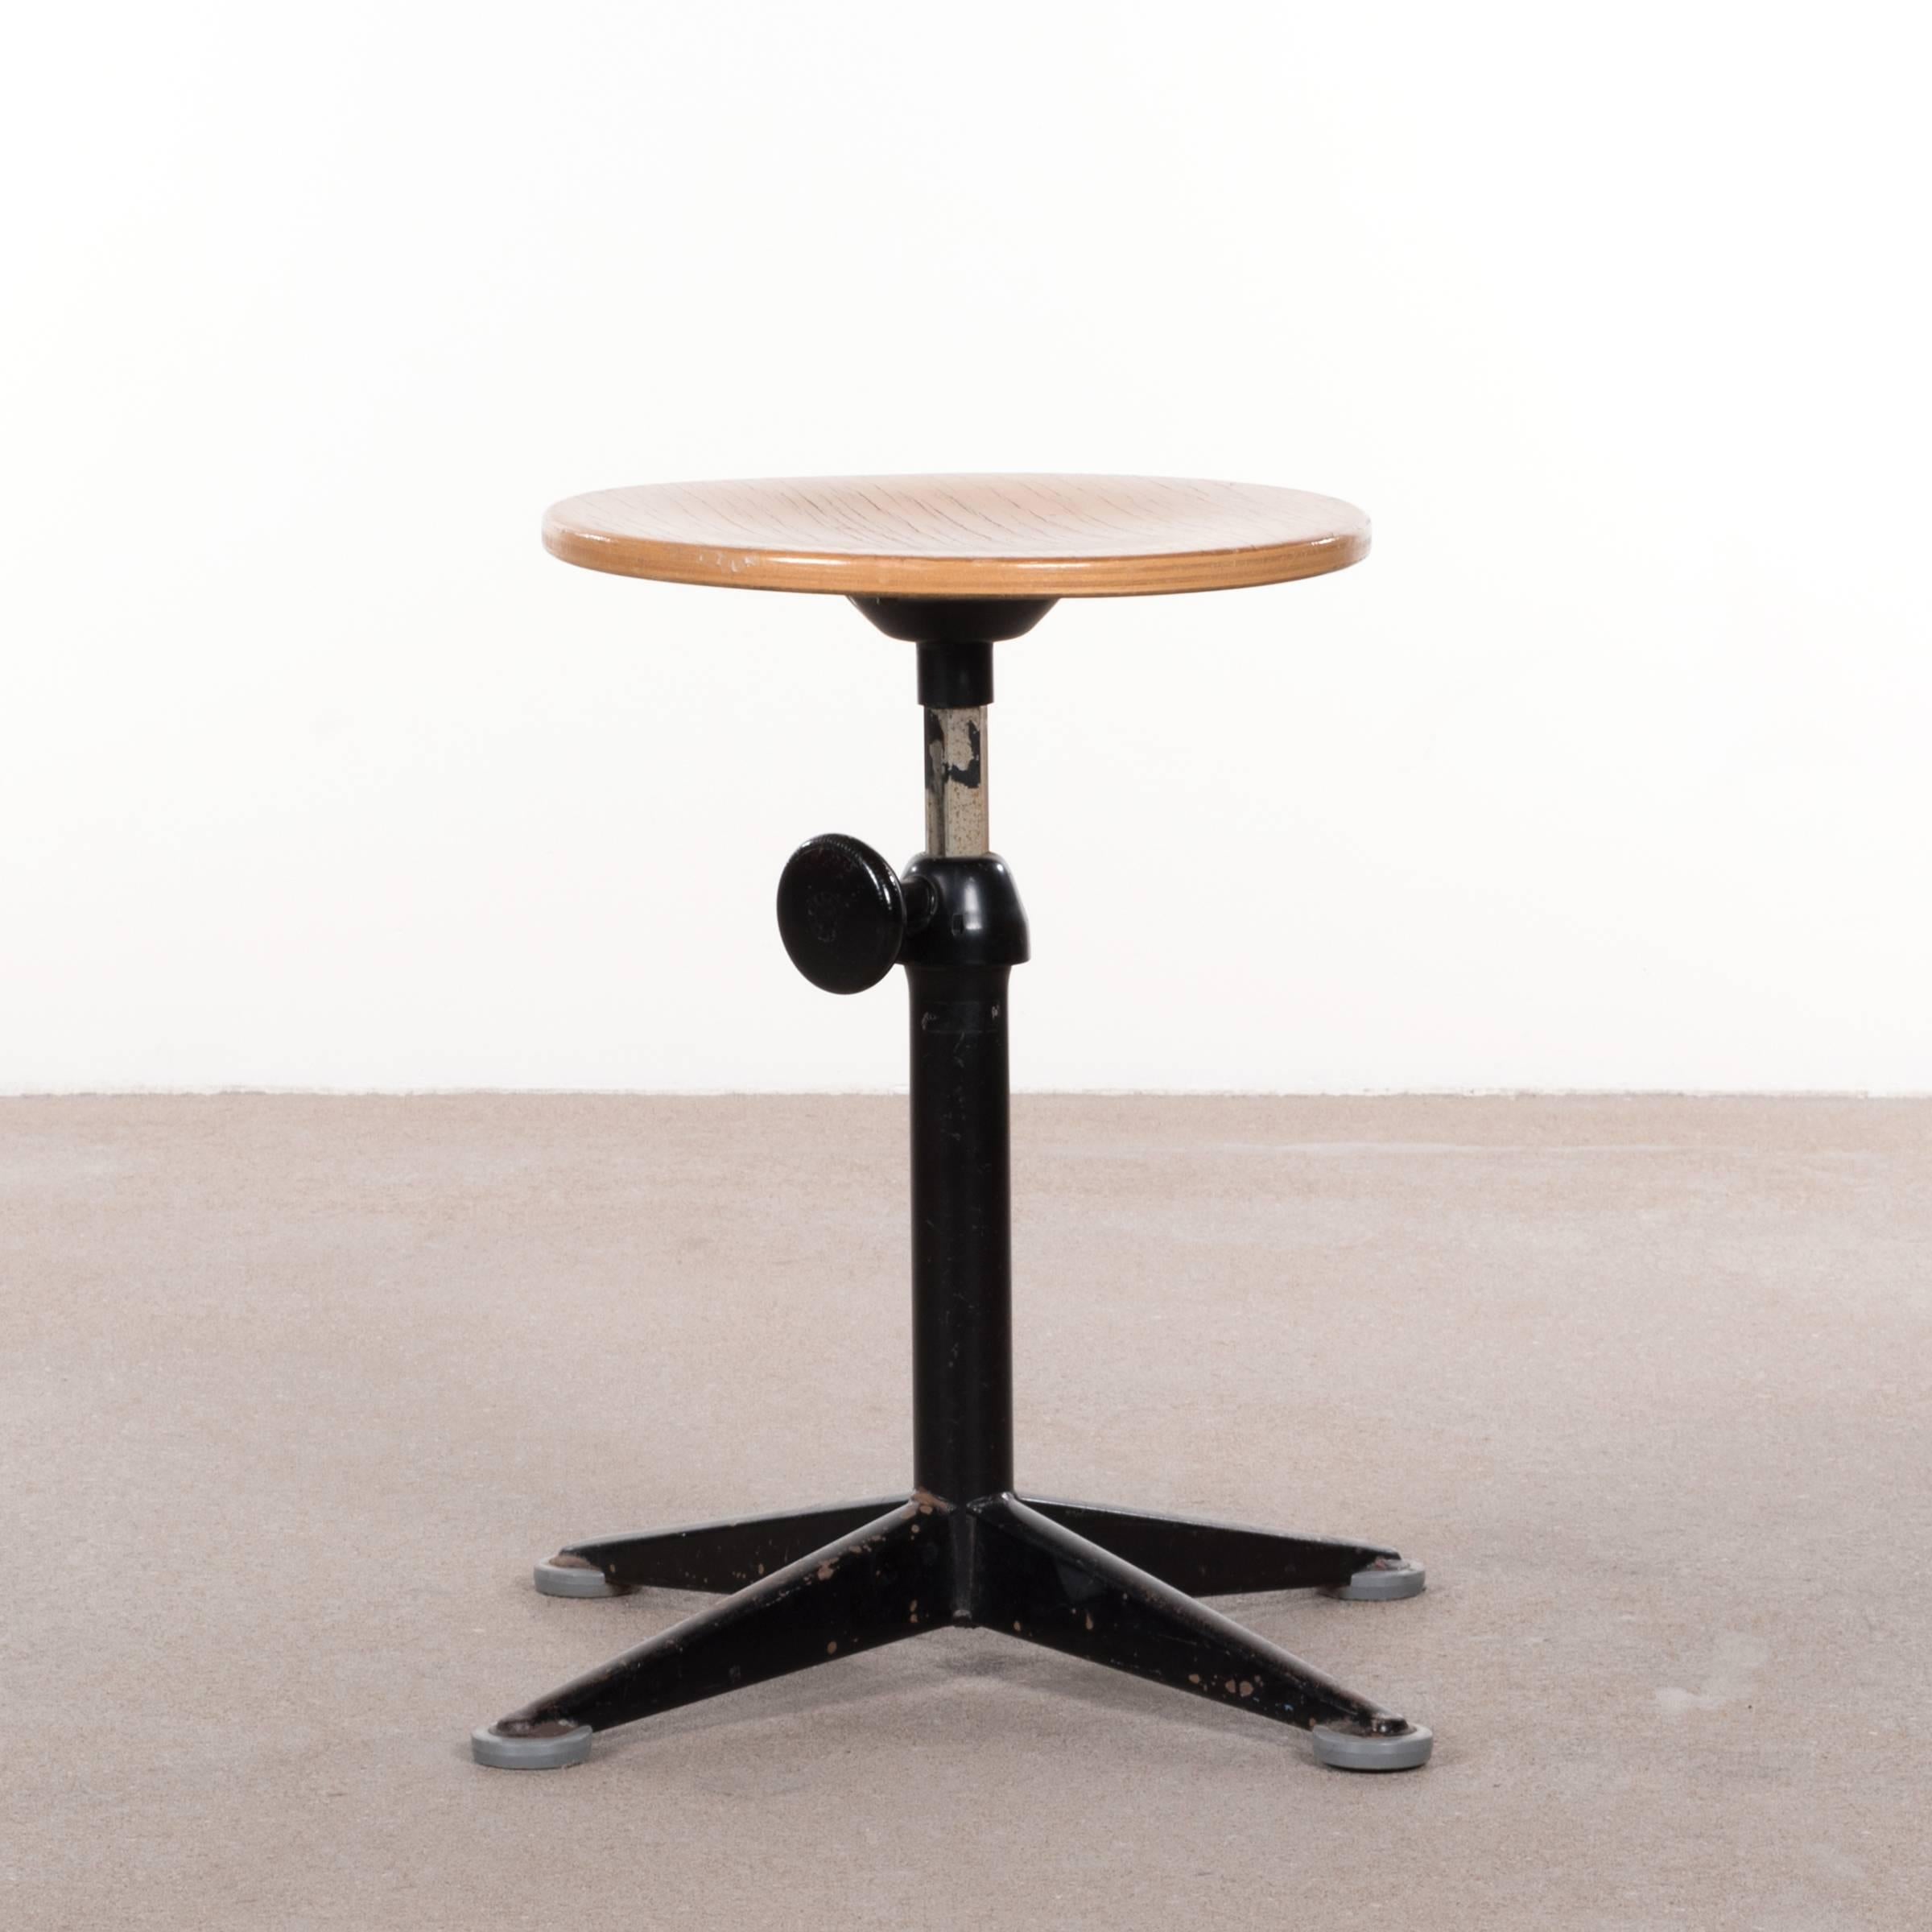 Functional and Industrial stools by Friso Kramer. The stools are adjustable in height (± 45-65 cm) and swivel. Good vintage condition with black enameled steel bases and oak seats. Signed with impressed manufacturer's mark.